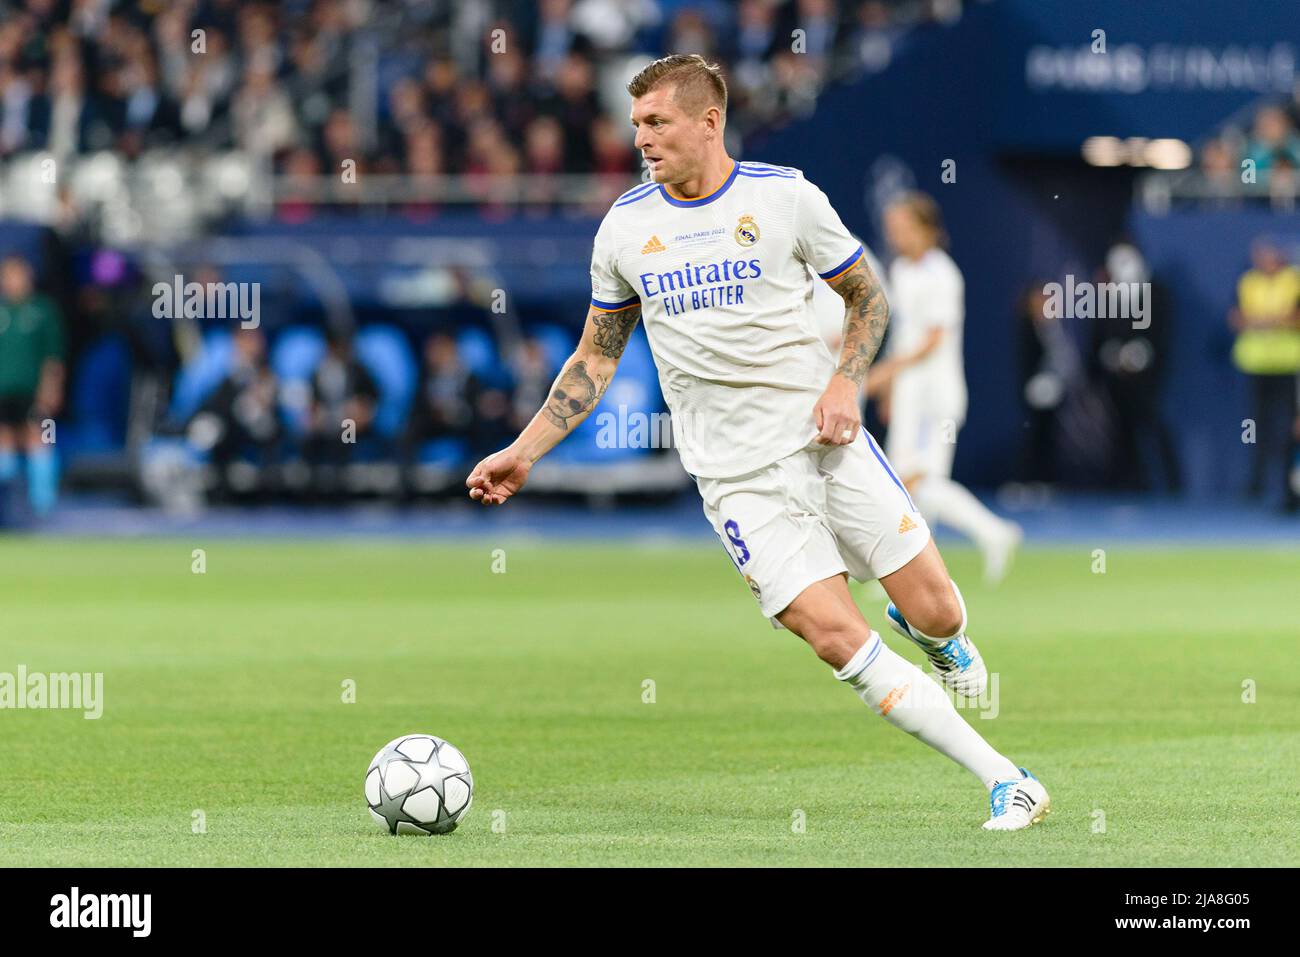 PARIS, FRANCE - MAY 28: Toni Kroos of Real Madrid CF runs with the ball  during the UEFA Champions League final match between Liverpool FC and Real  Madrid at Stade de France